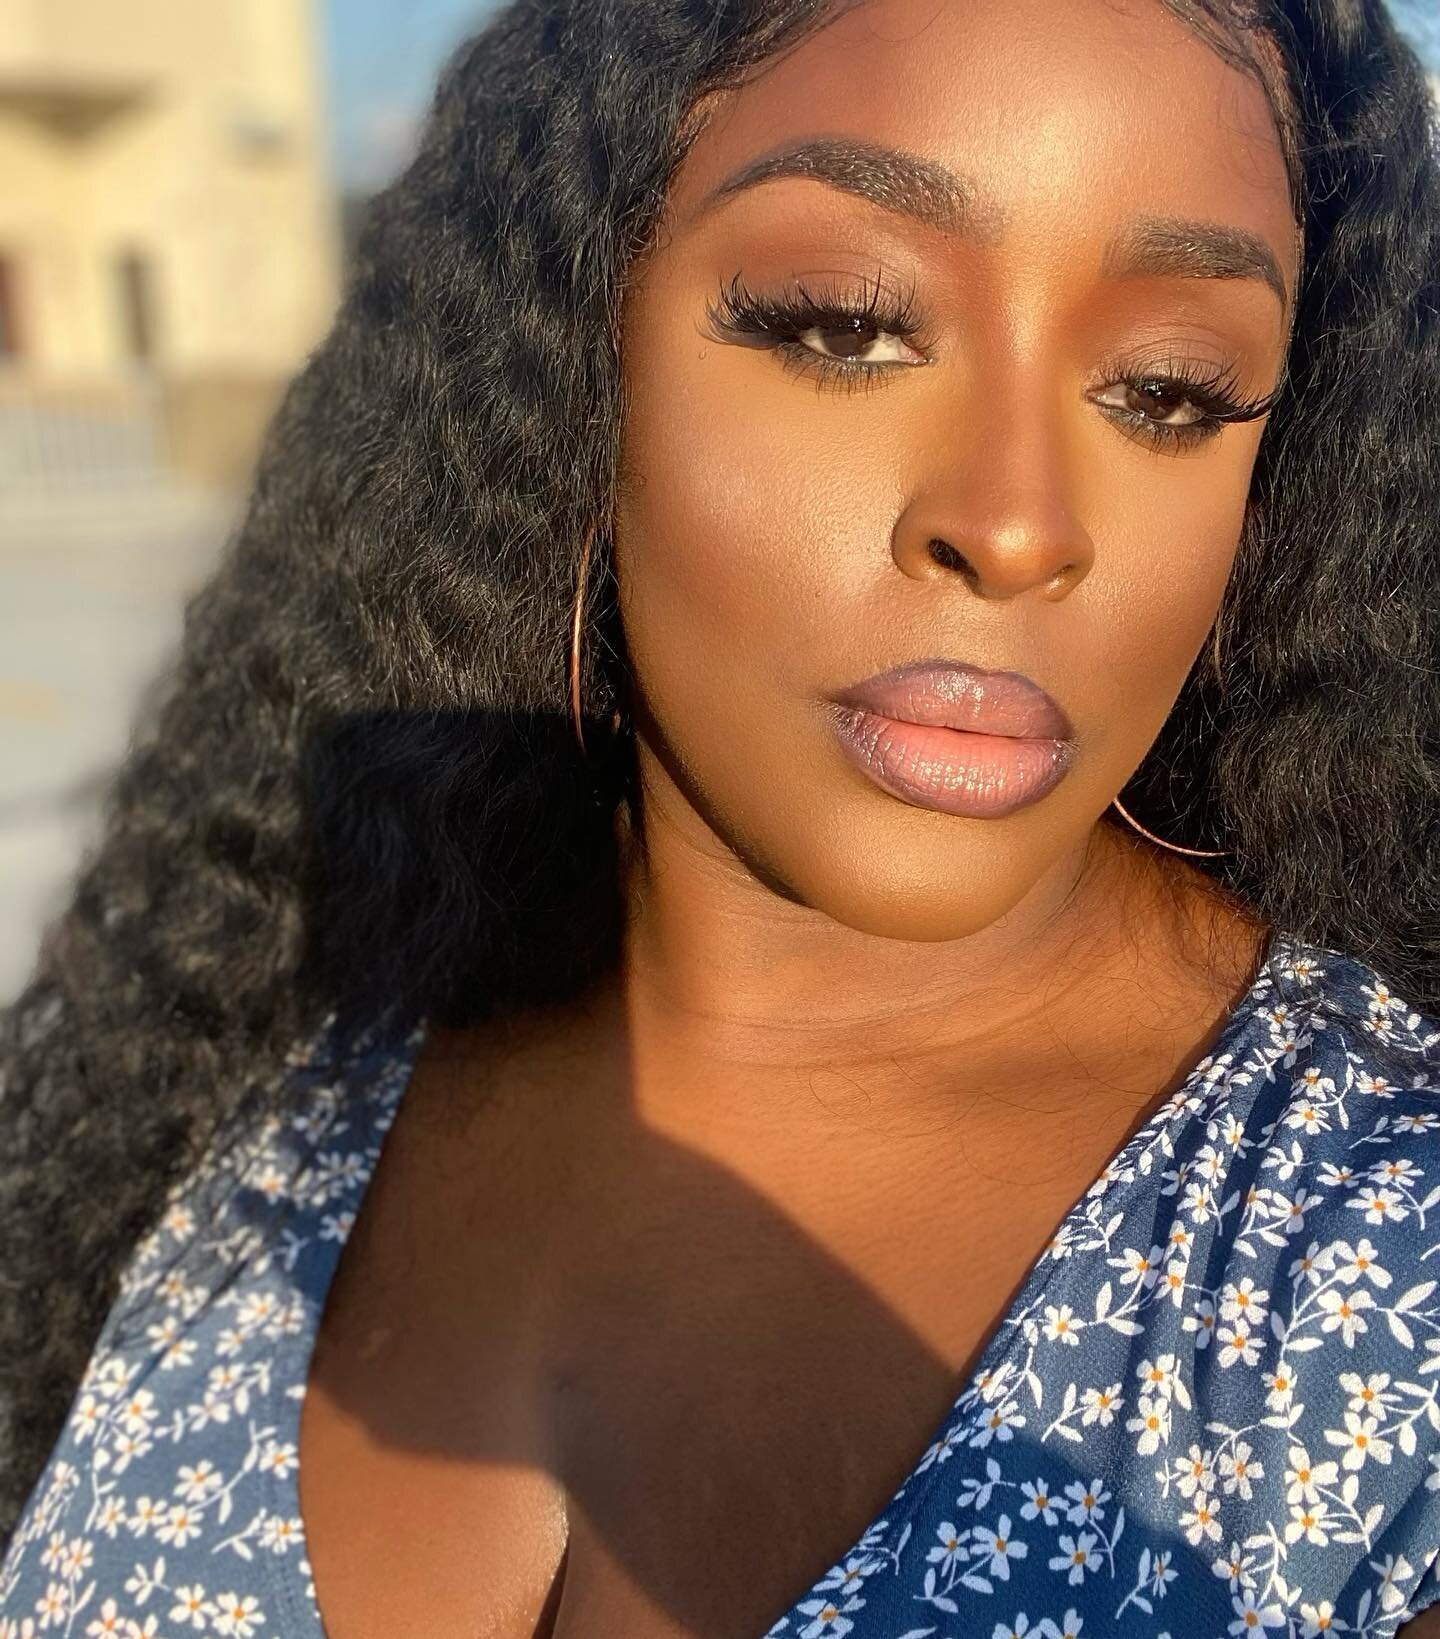 &ldquo;Bare&rdquo; Satin Matte Lipstick paired with a dark liner is giving the perfect combo for the weekend 💋

Audrey&rsquo;s Birthday sale is still active ✨ 29% off your total order 

Shop now www.AudreysArtistry.com

What will be your go to Lippi